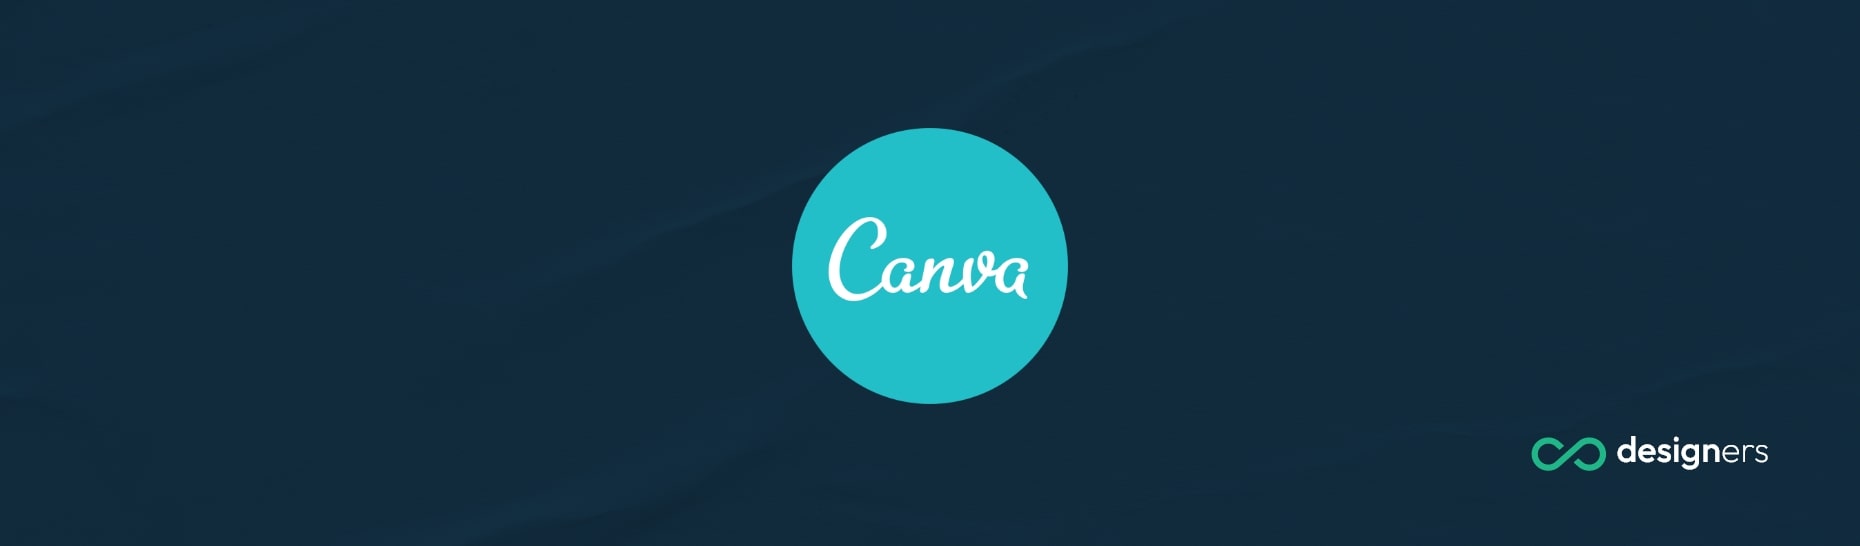 Does Canva Have a Photo Limit?